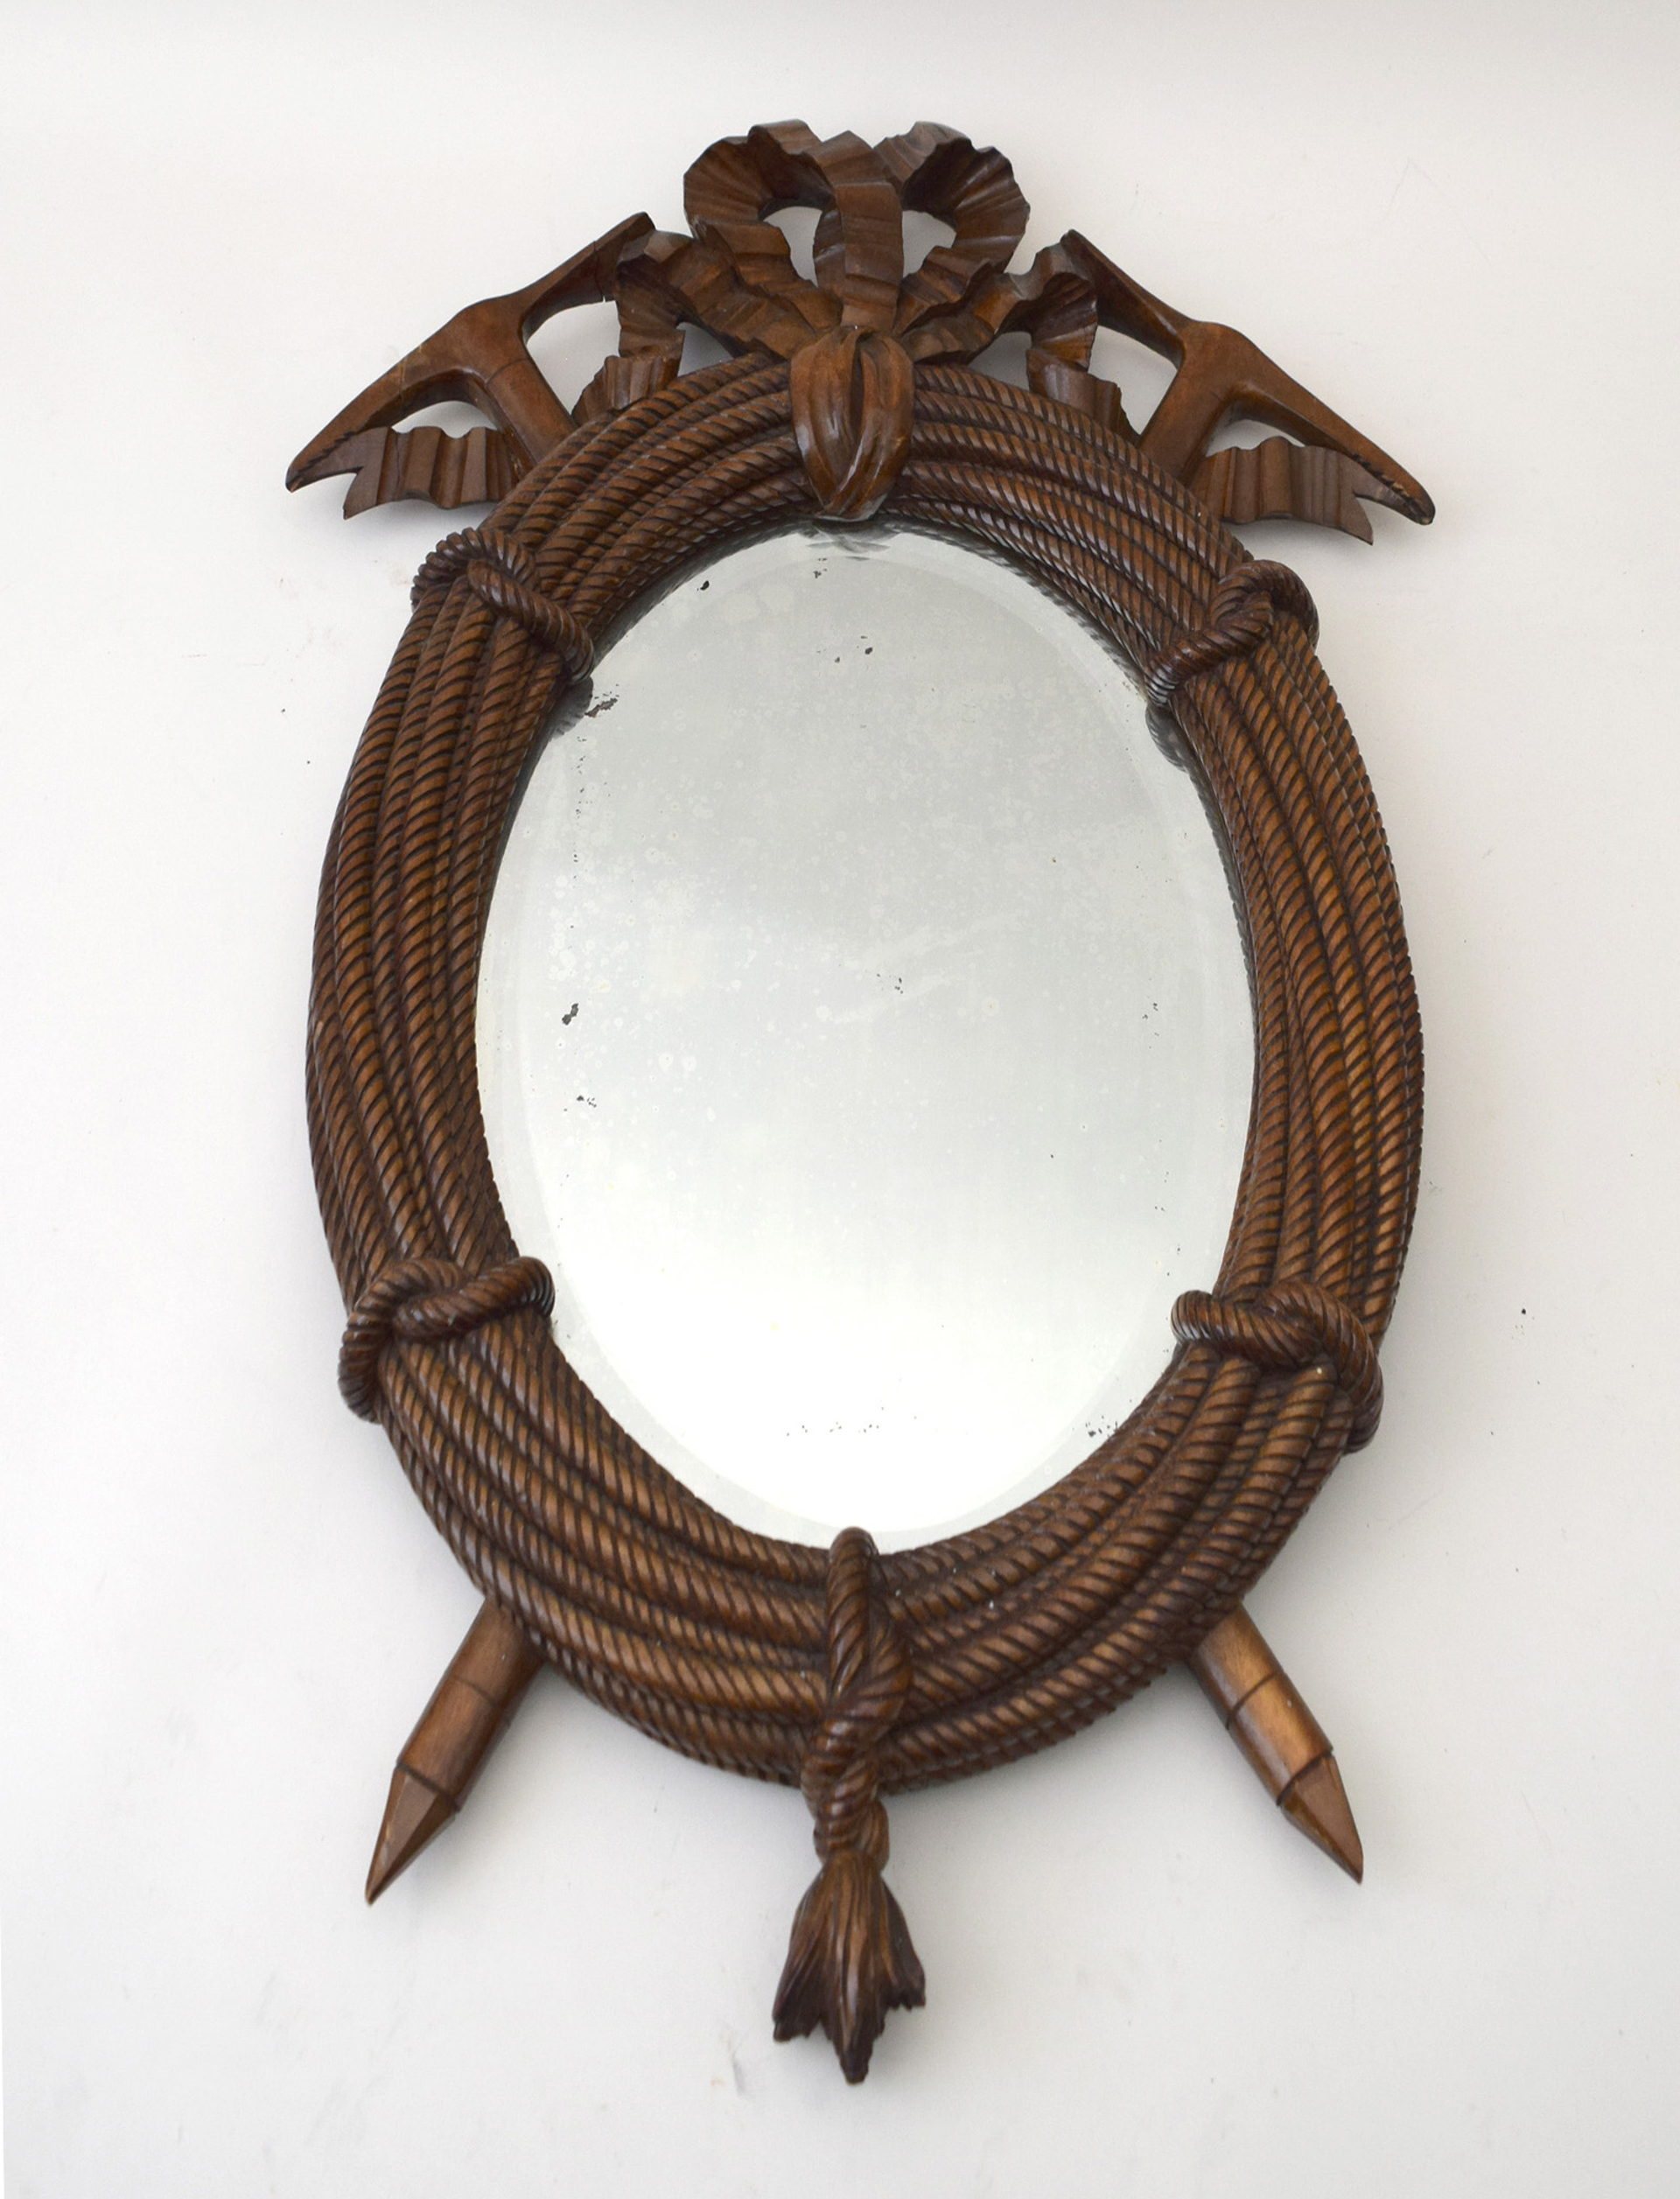 SMALL OVAL MIRROR CARVED WITH BOW-TIED COILED ROPE AND CROSSED PICK AXES